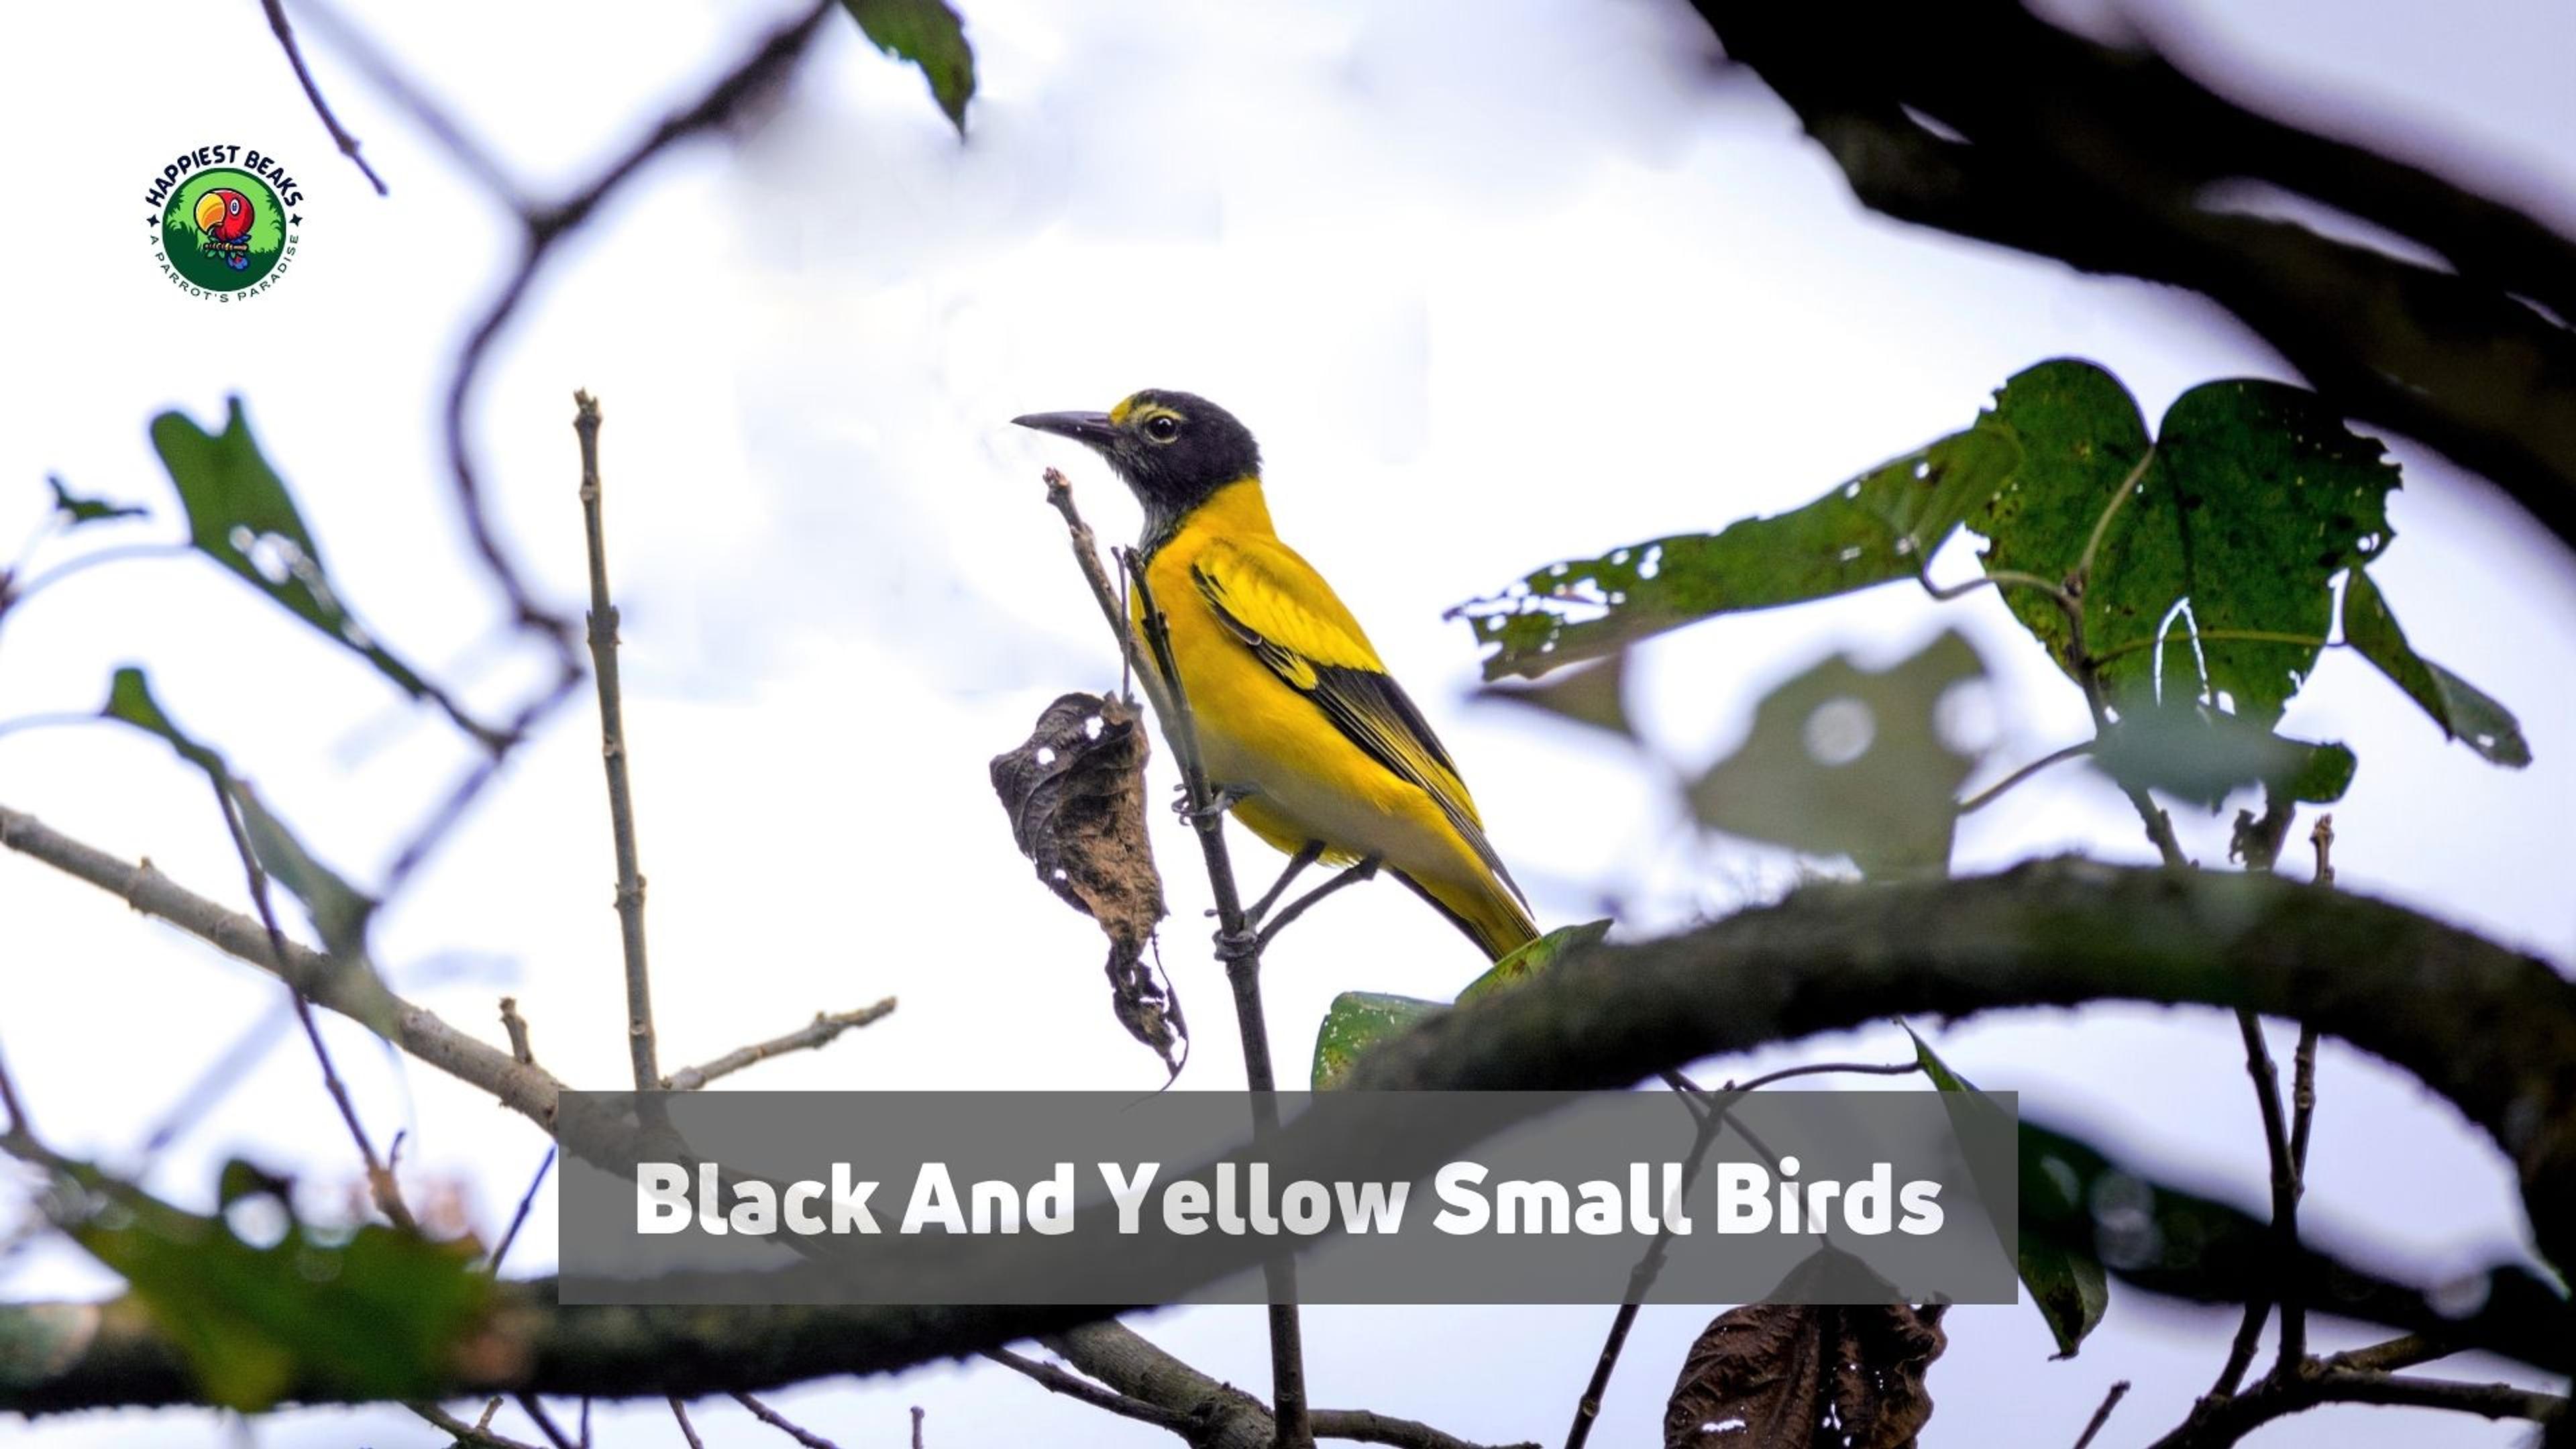 Black And Yellow Small Birds